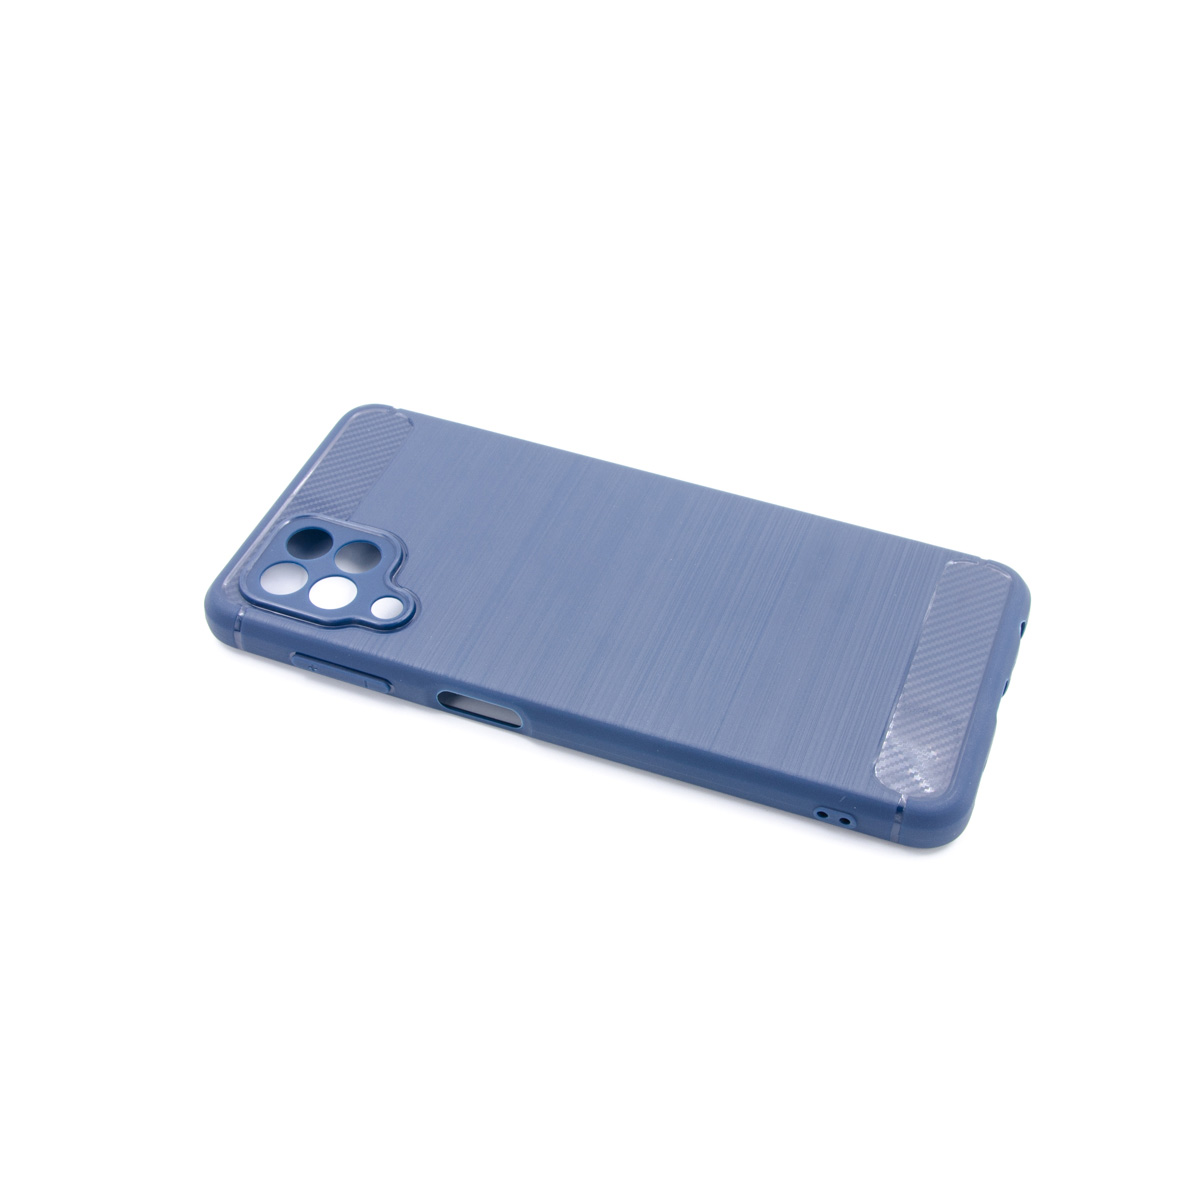 Tpu brushed for sm-a225f (galaxy a22 4g) blue